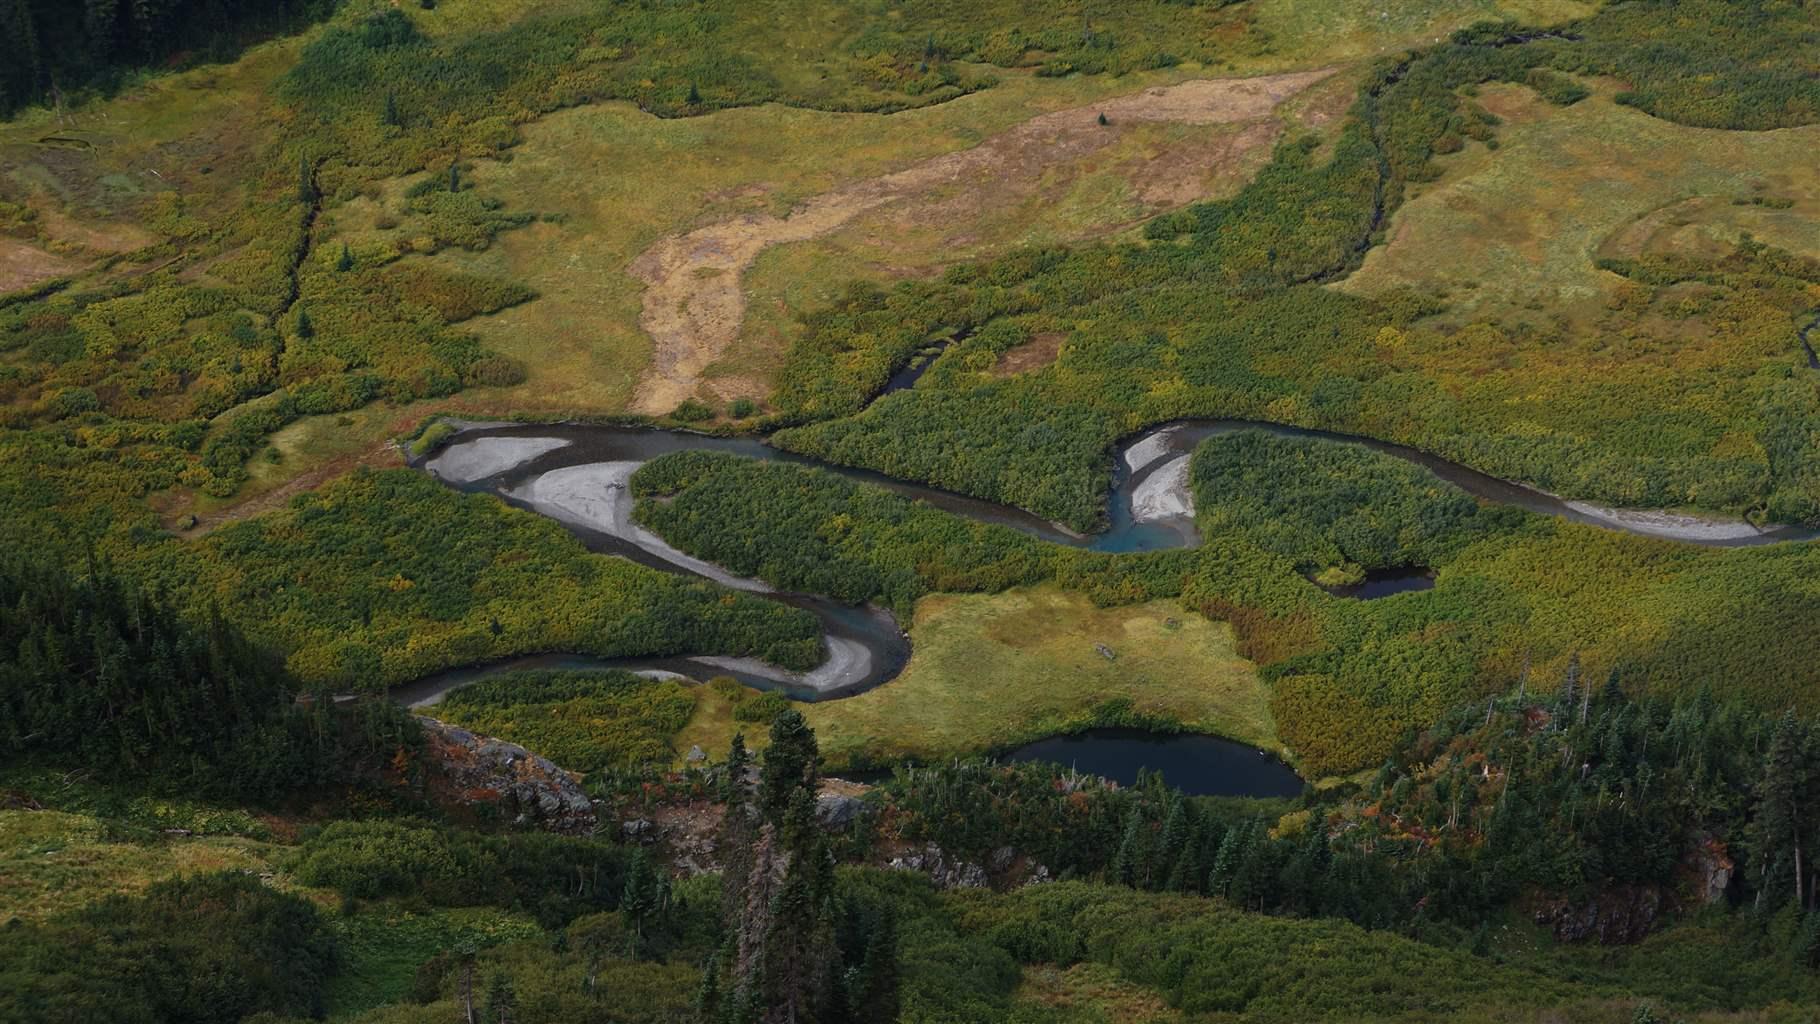 An aerial photo shows a river snaking through hilly, green, undeveloped terrain.